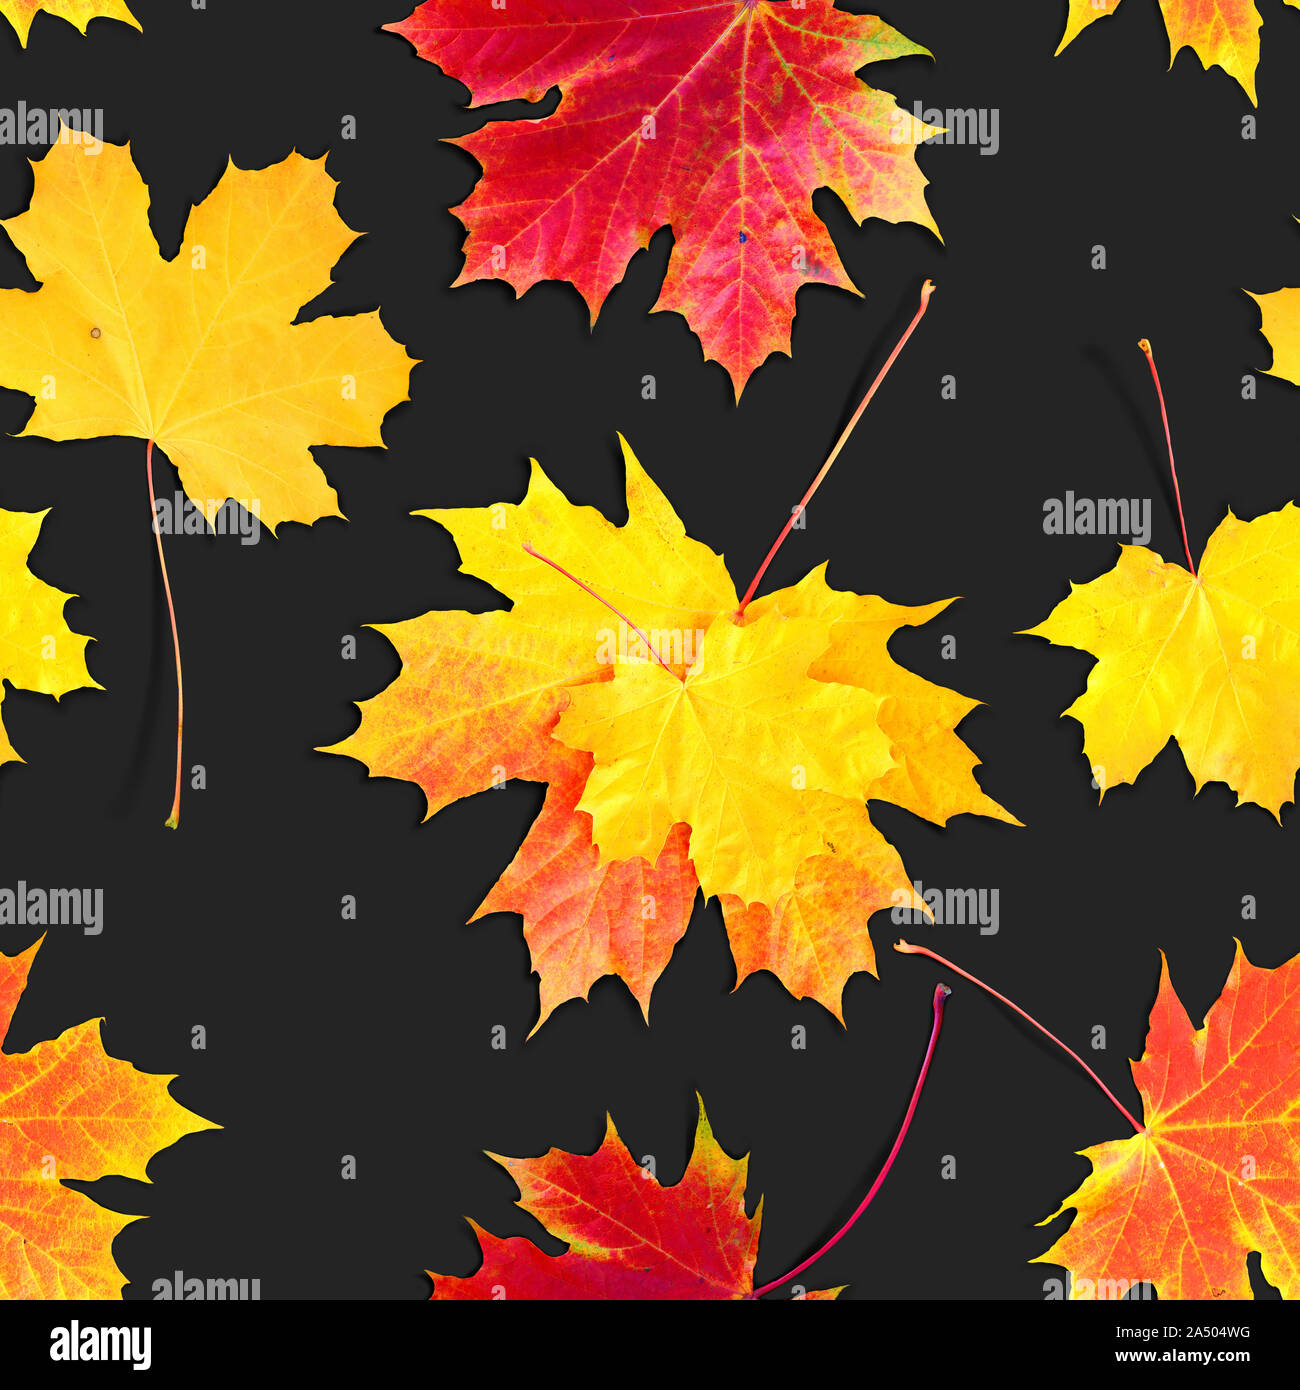 Seamless texture of yellow and red fallen autumn leaves on gray background. Stock Photo